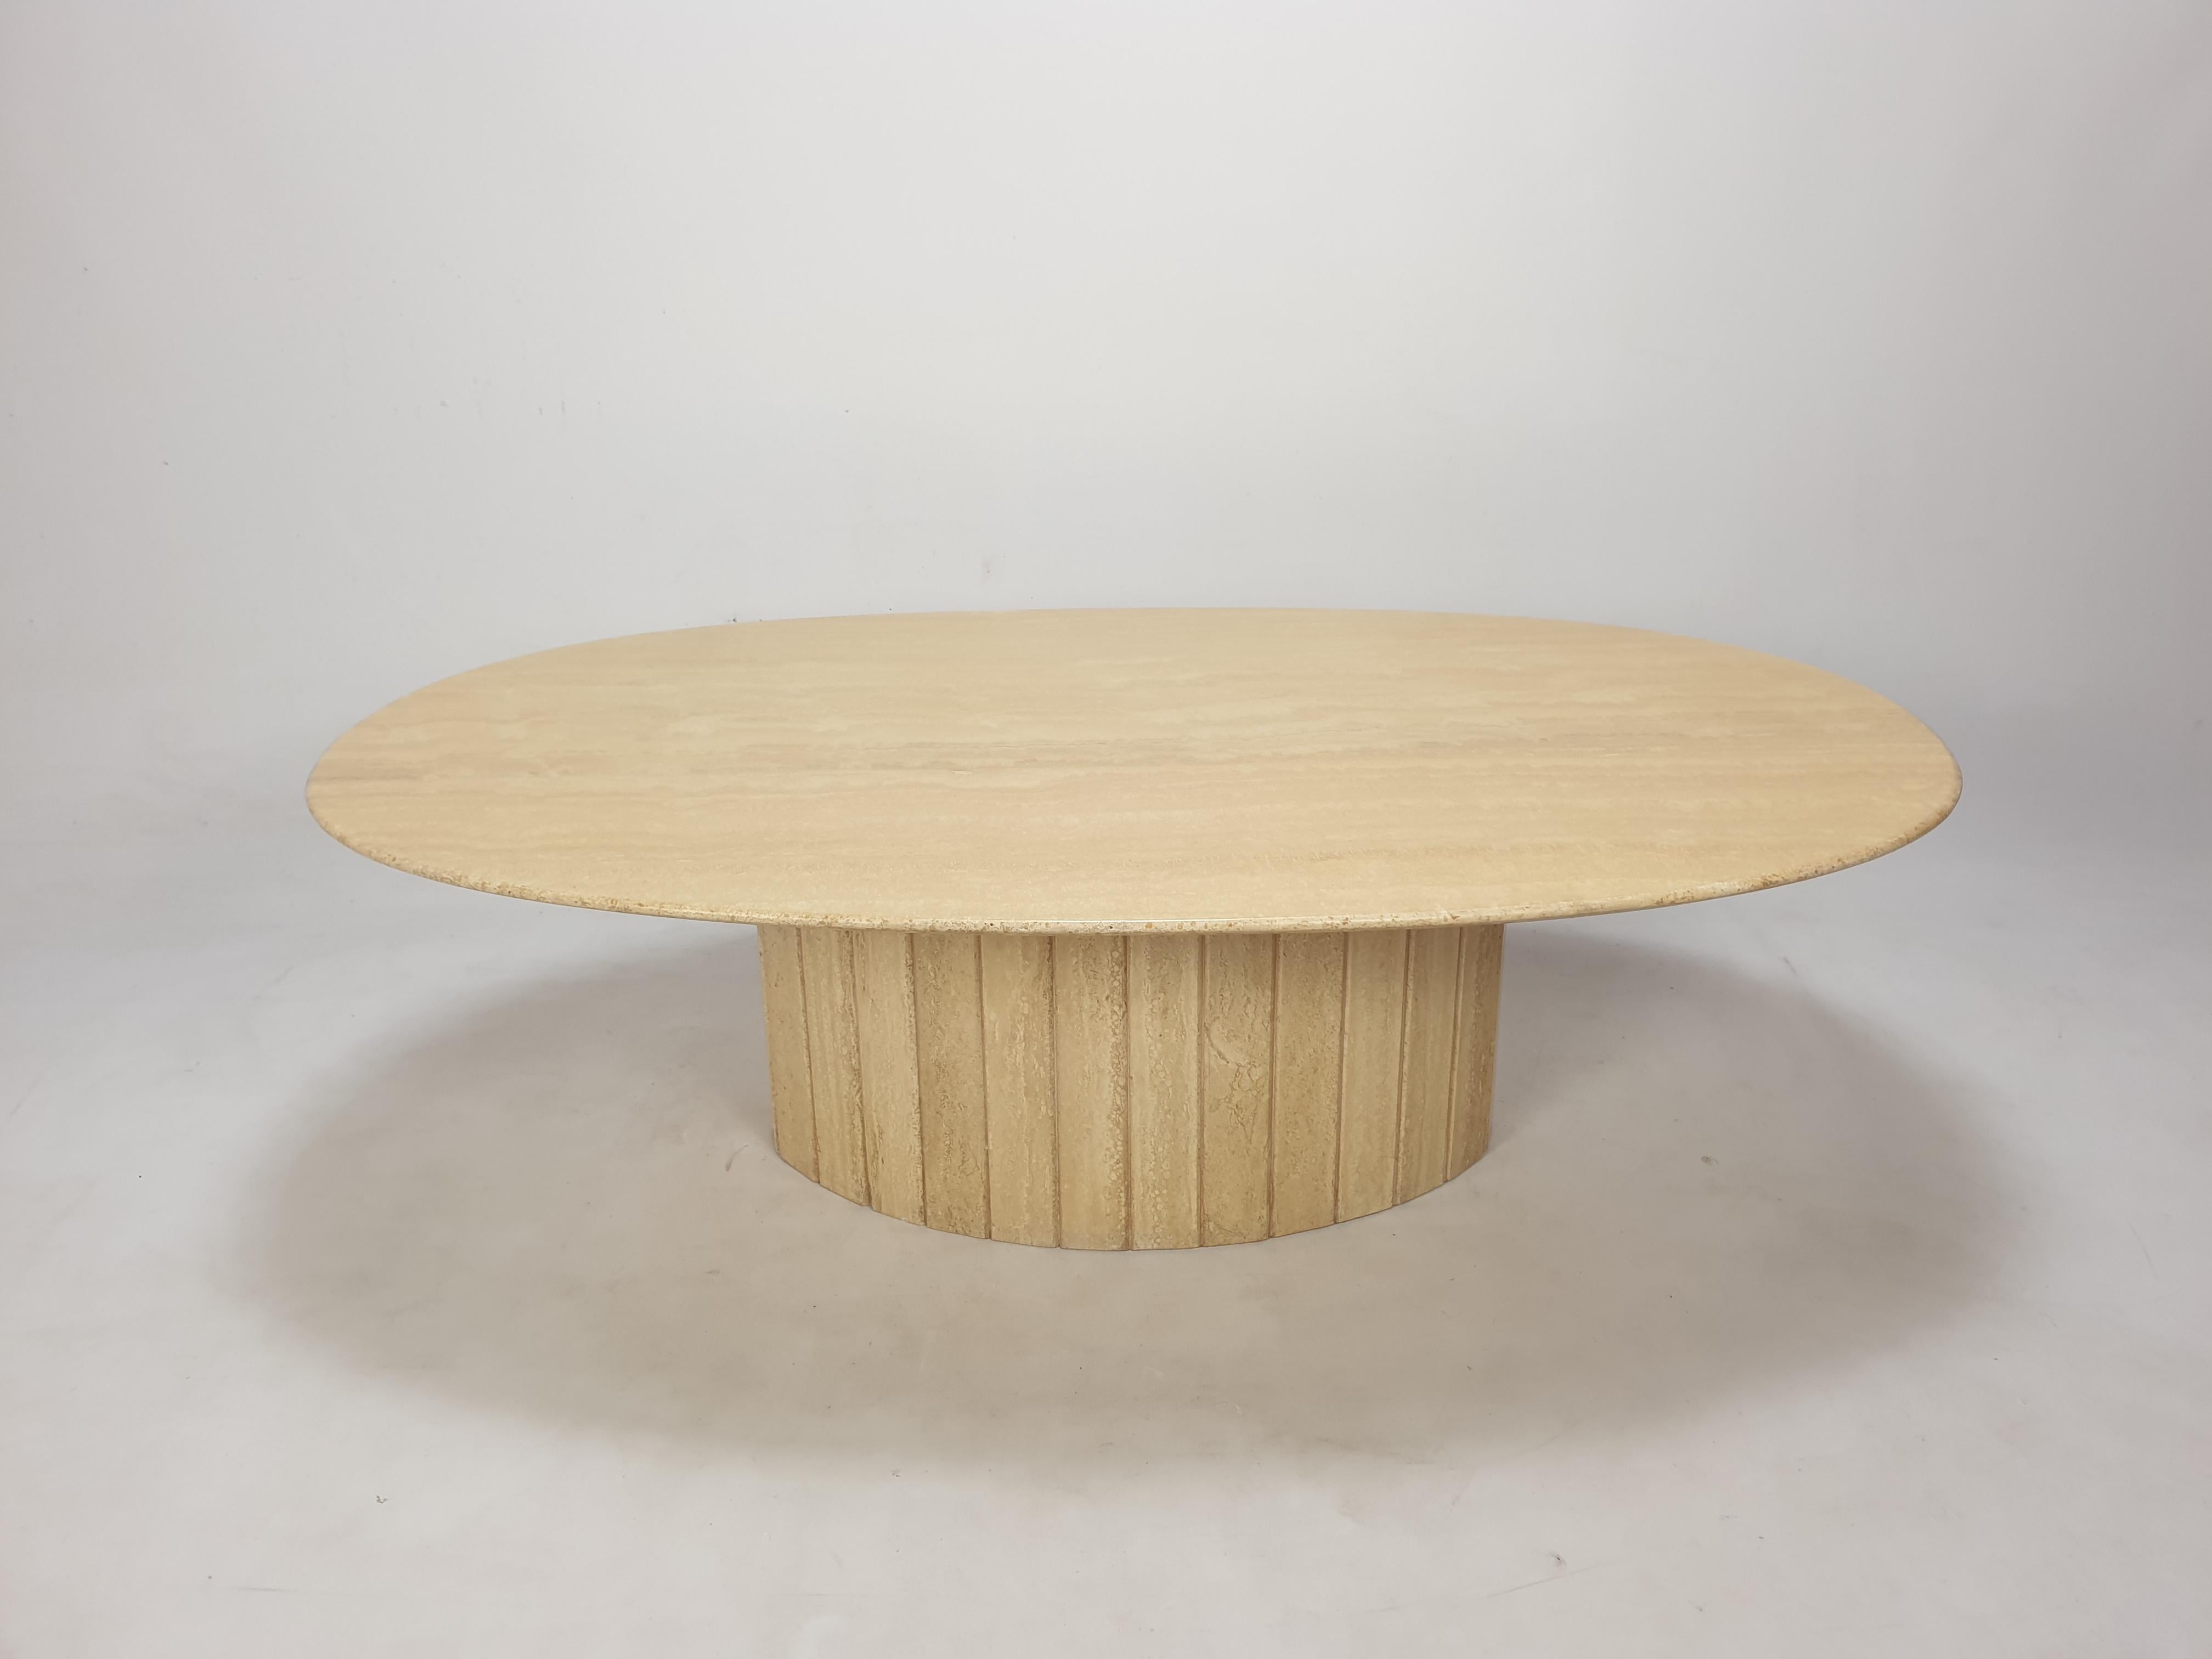 Hand-Crafted Mid-Century Italian Oval Travertine Coffee Table, 1980s